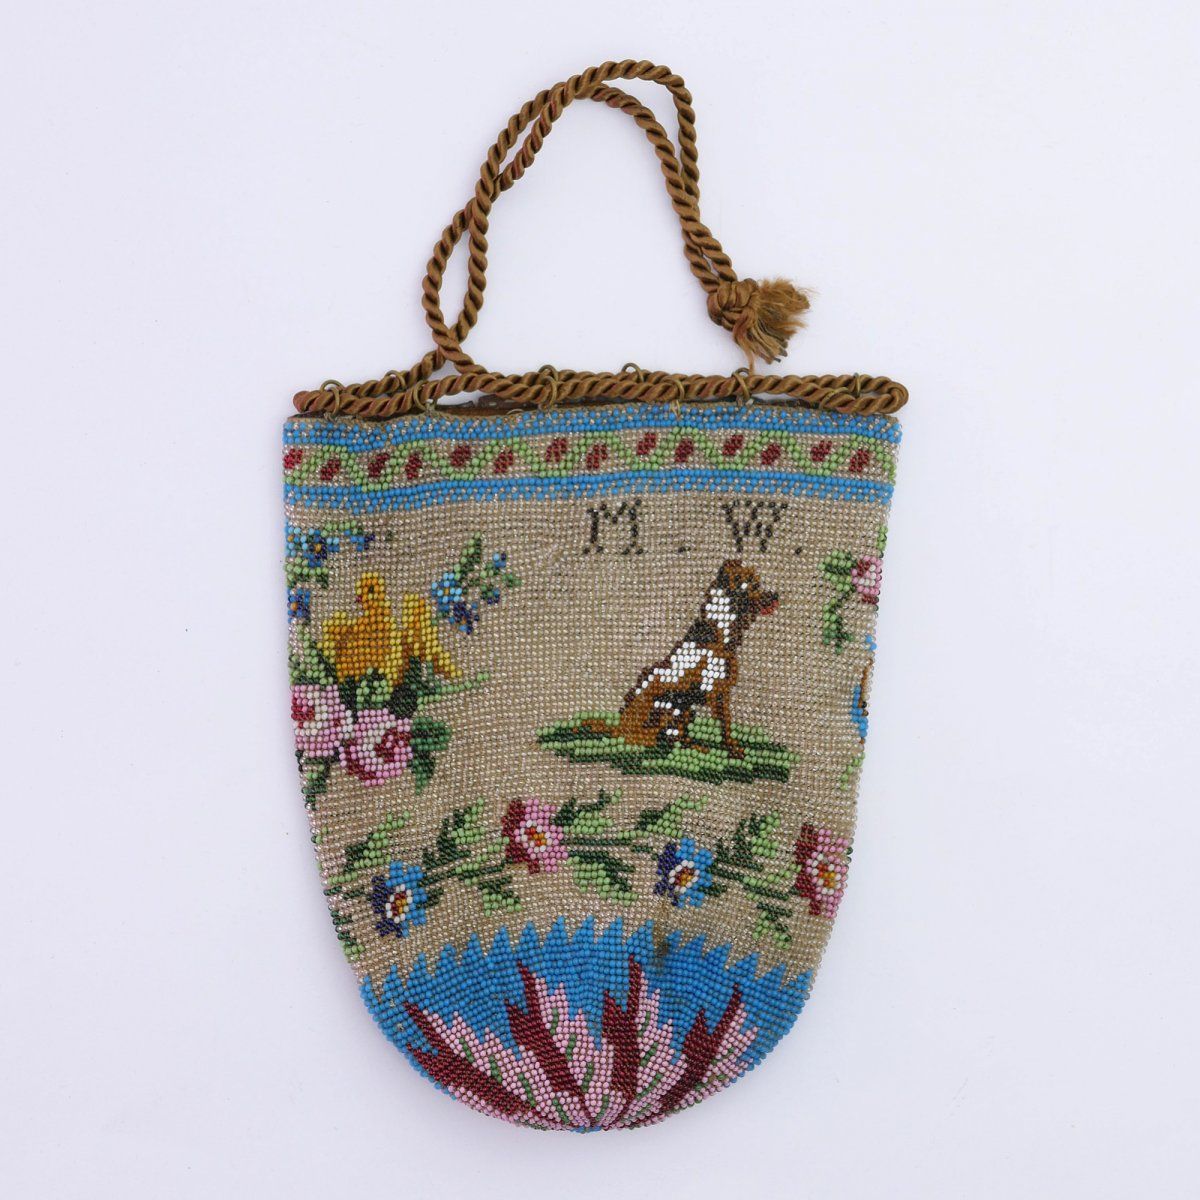 Null 'MW' tobacco pouch with flowers and animal motifs, 2nd half of the 19th cen&hellip;